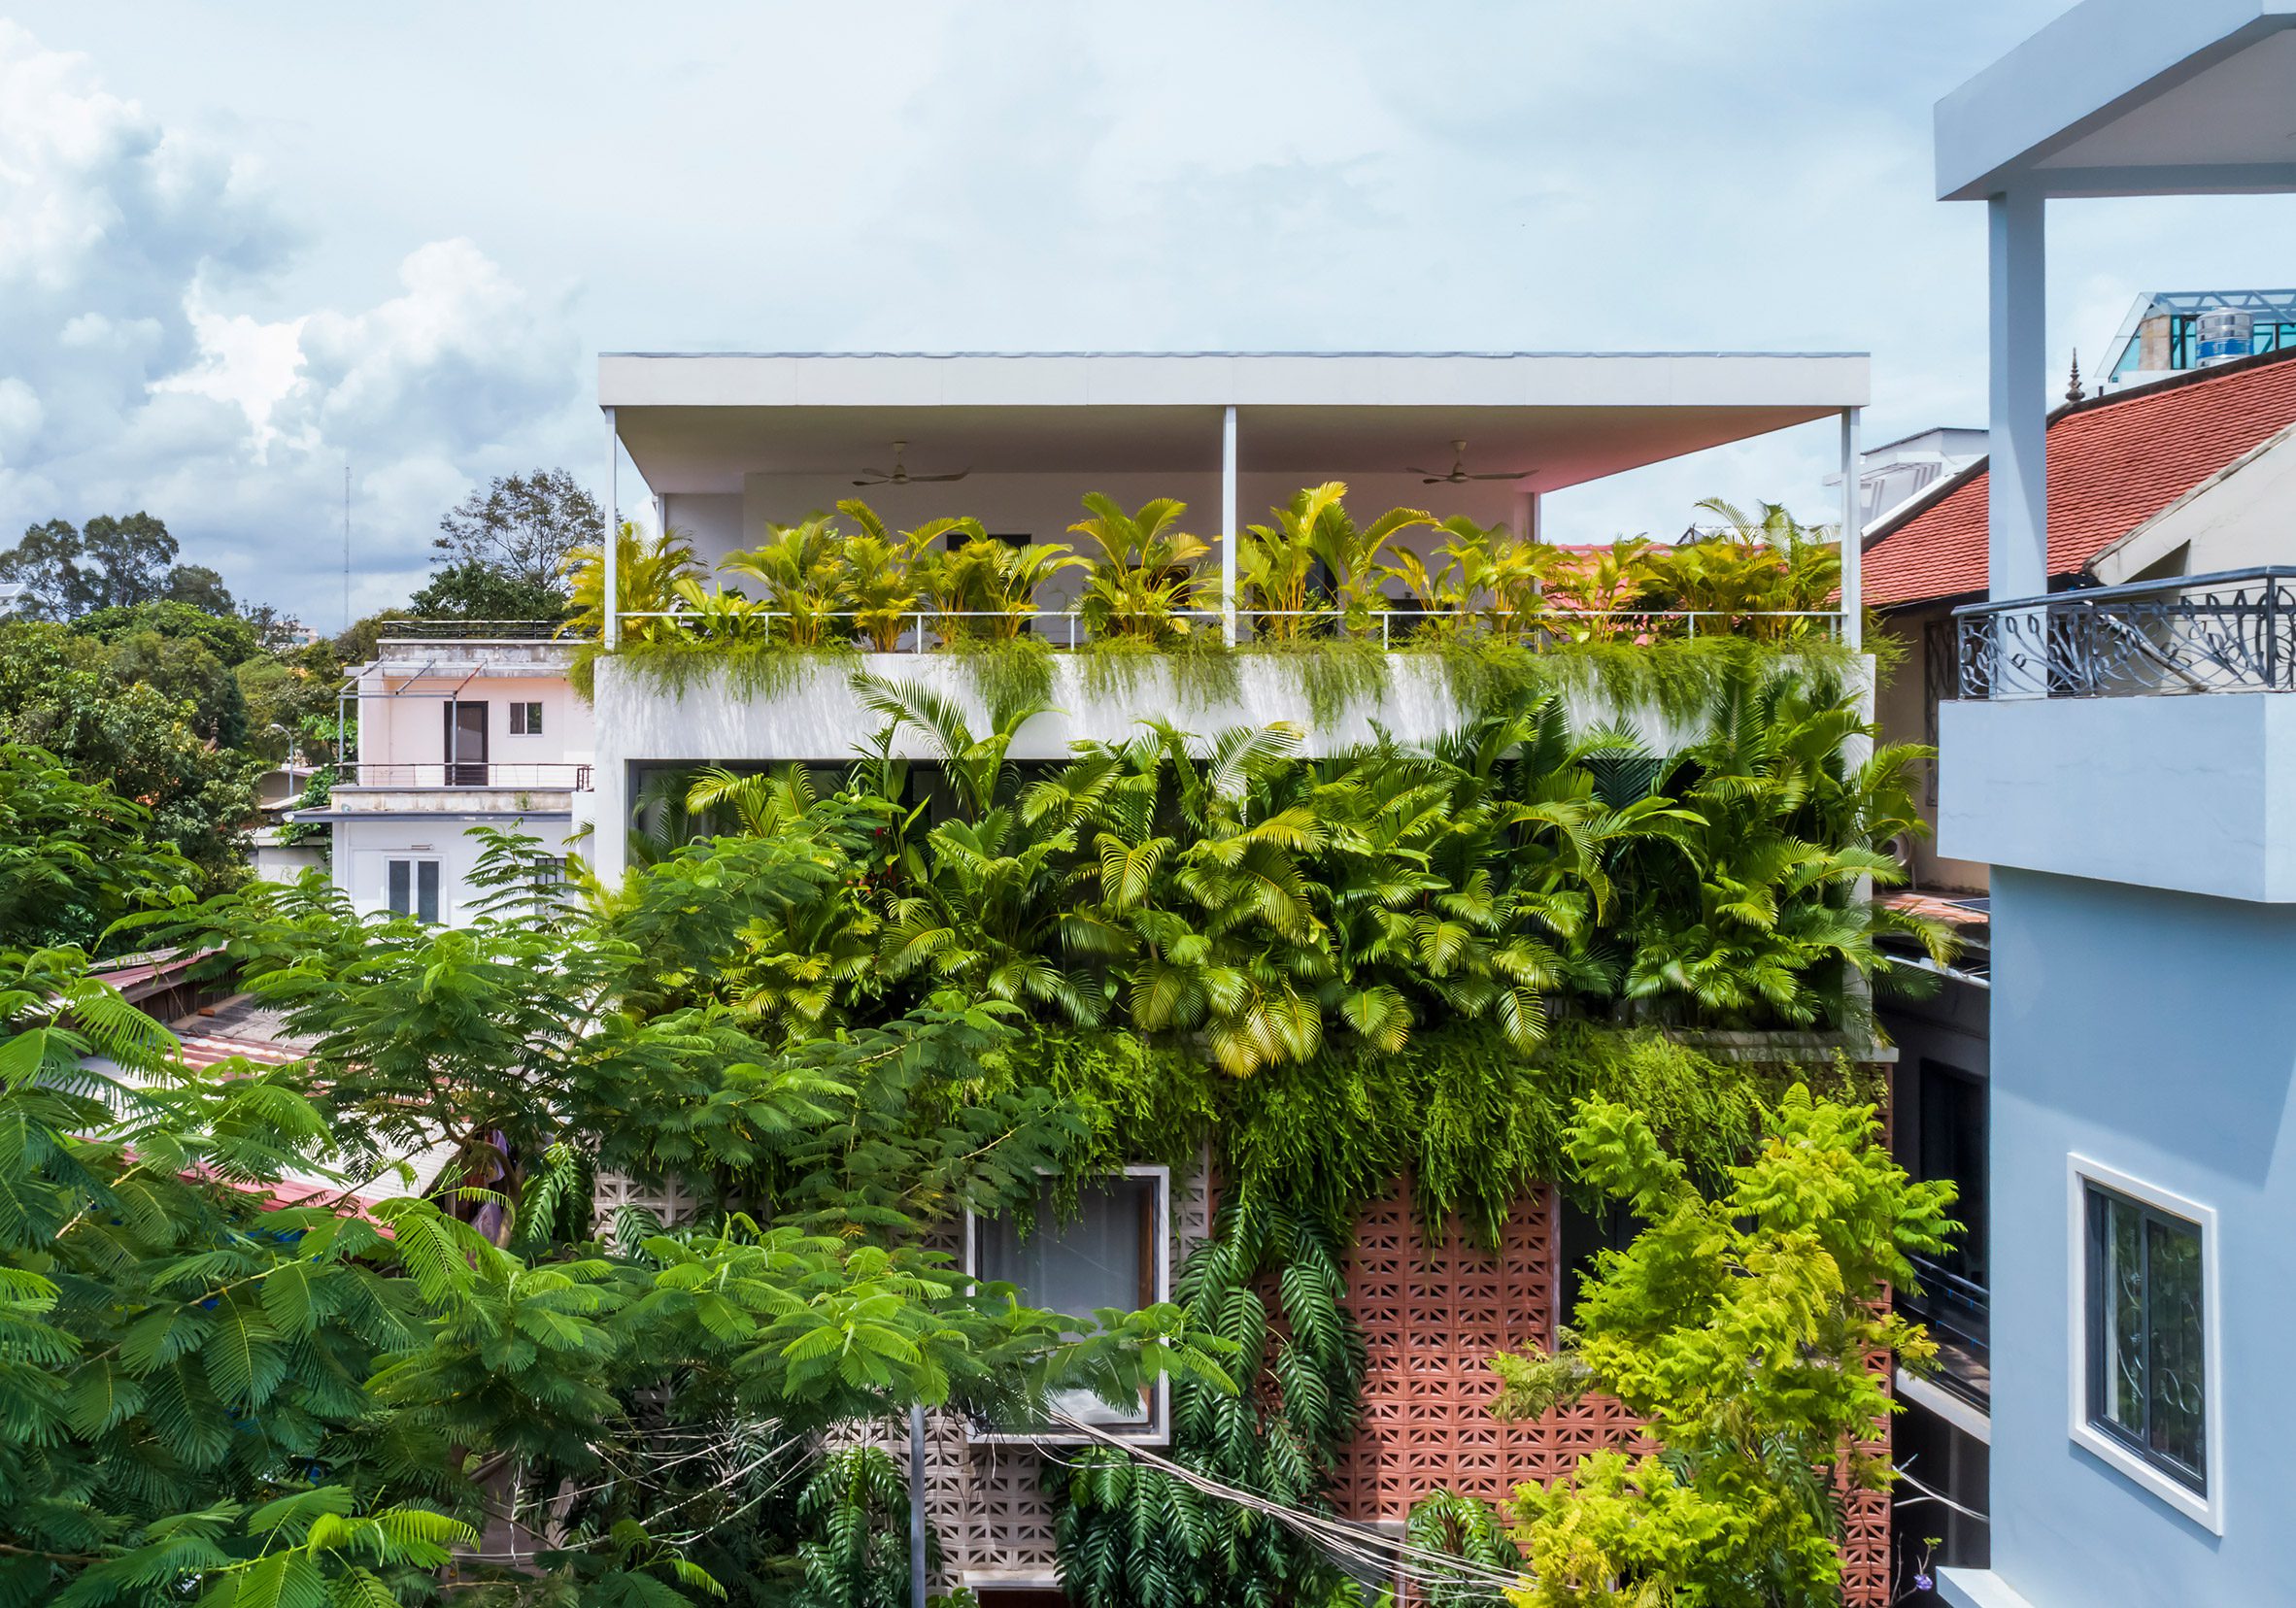 Plant-covered home in Cambodia made from perforated cement blocks by Bloom Architecture